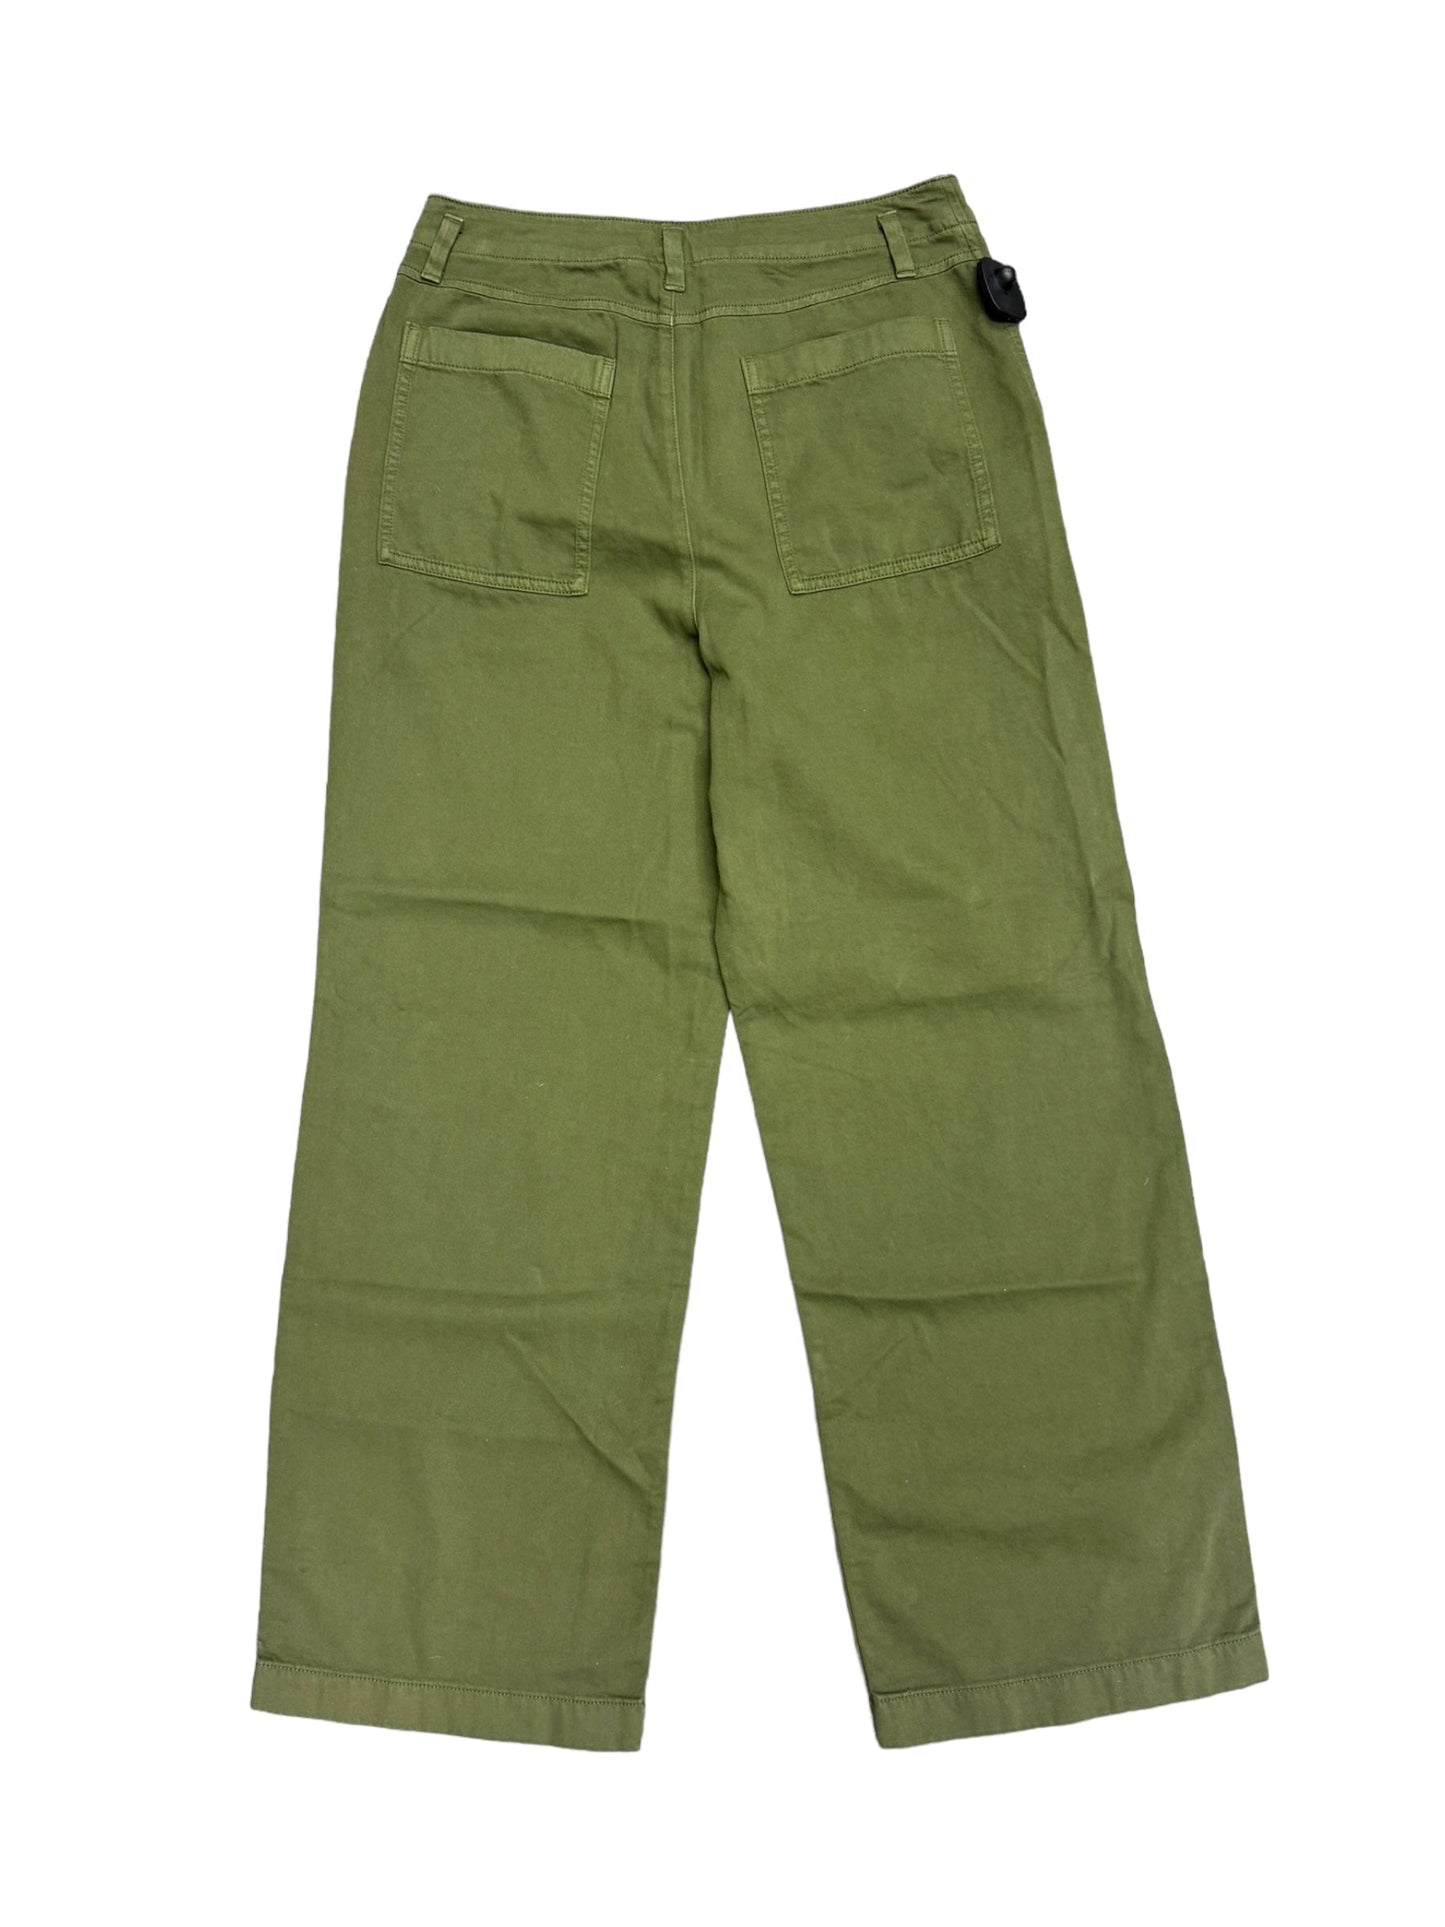 Green Pants Other Gap, Size 8